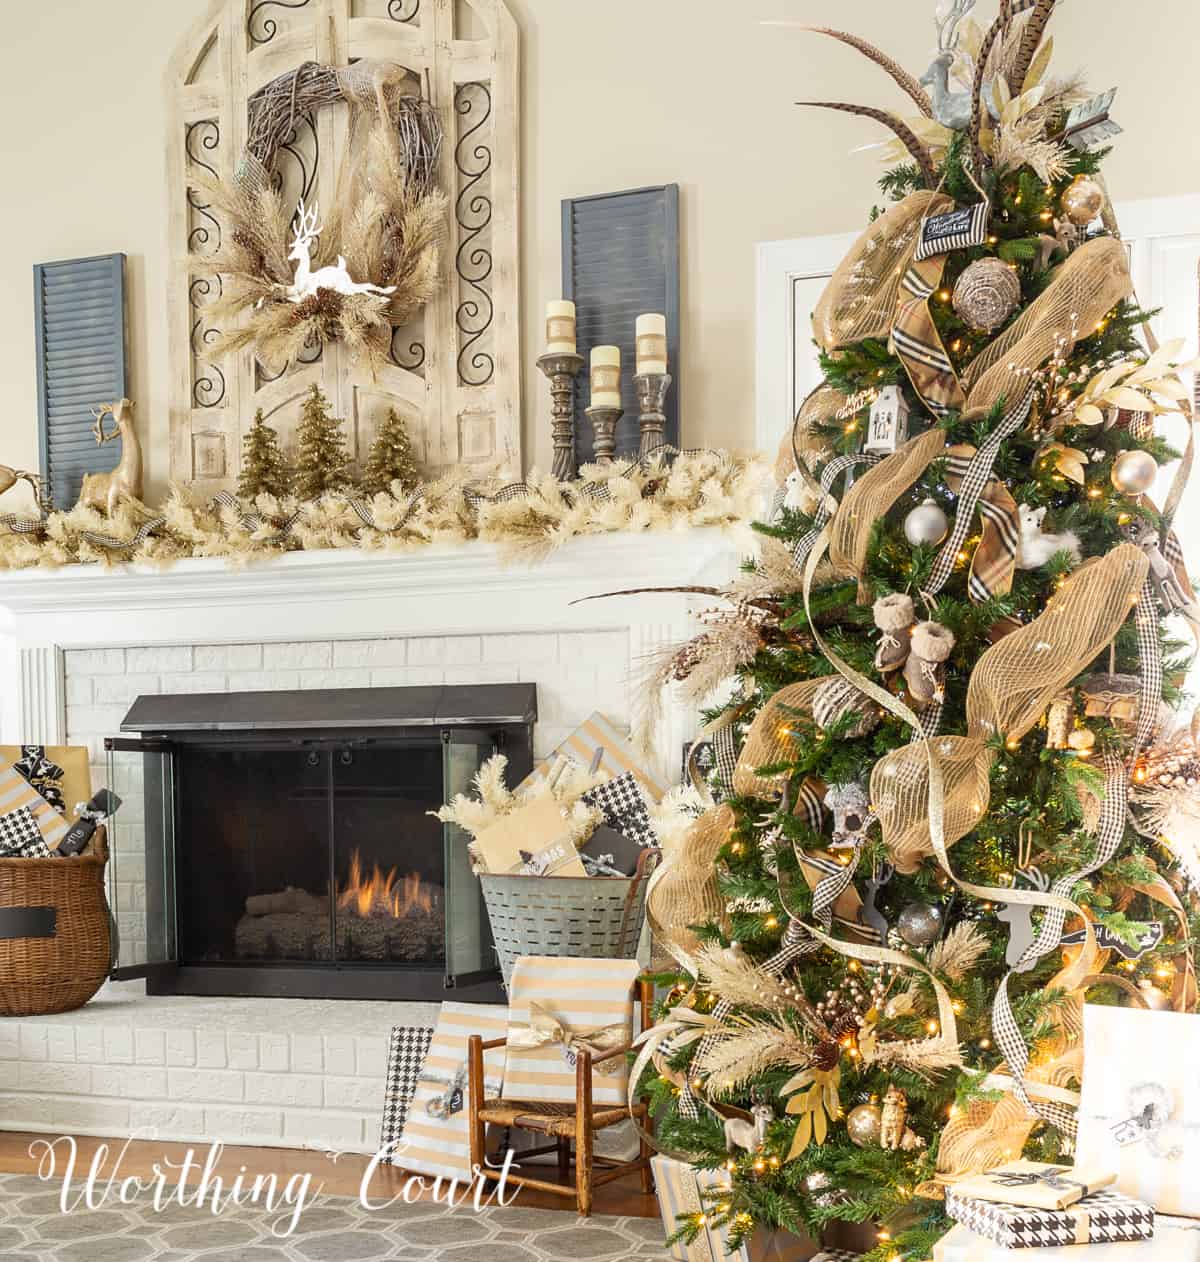 Christmas tree and fireplace decorated with gold and silver decor